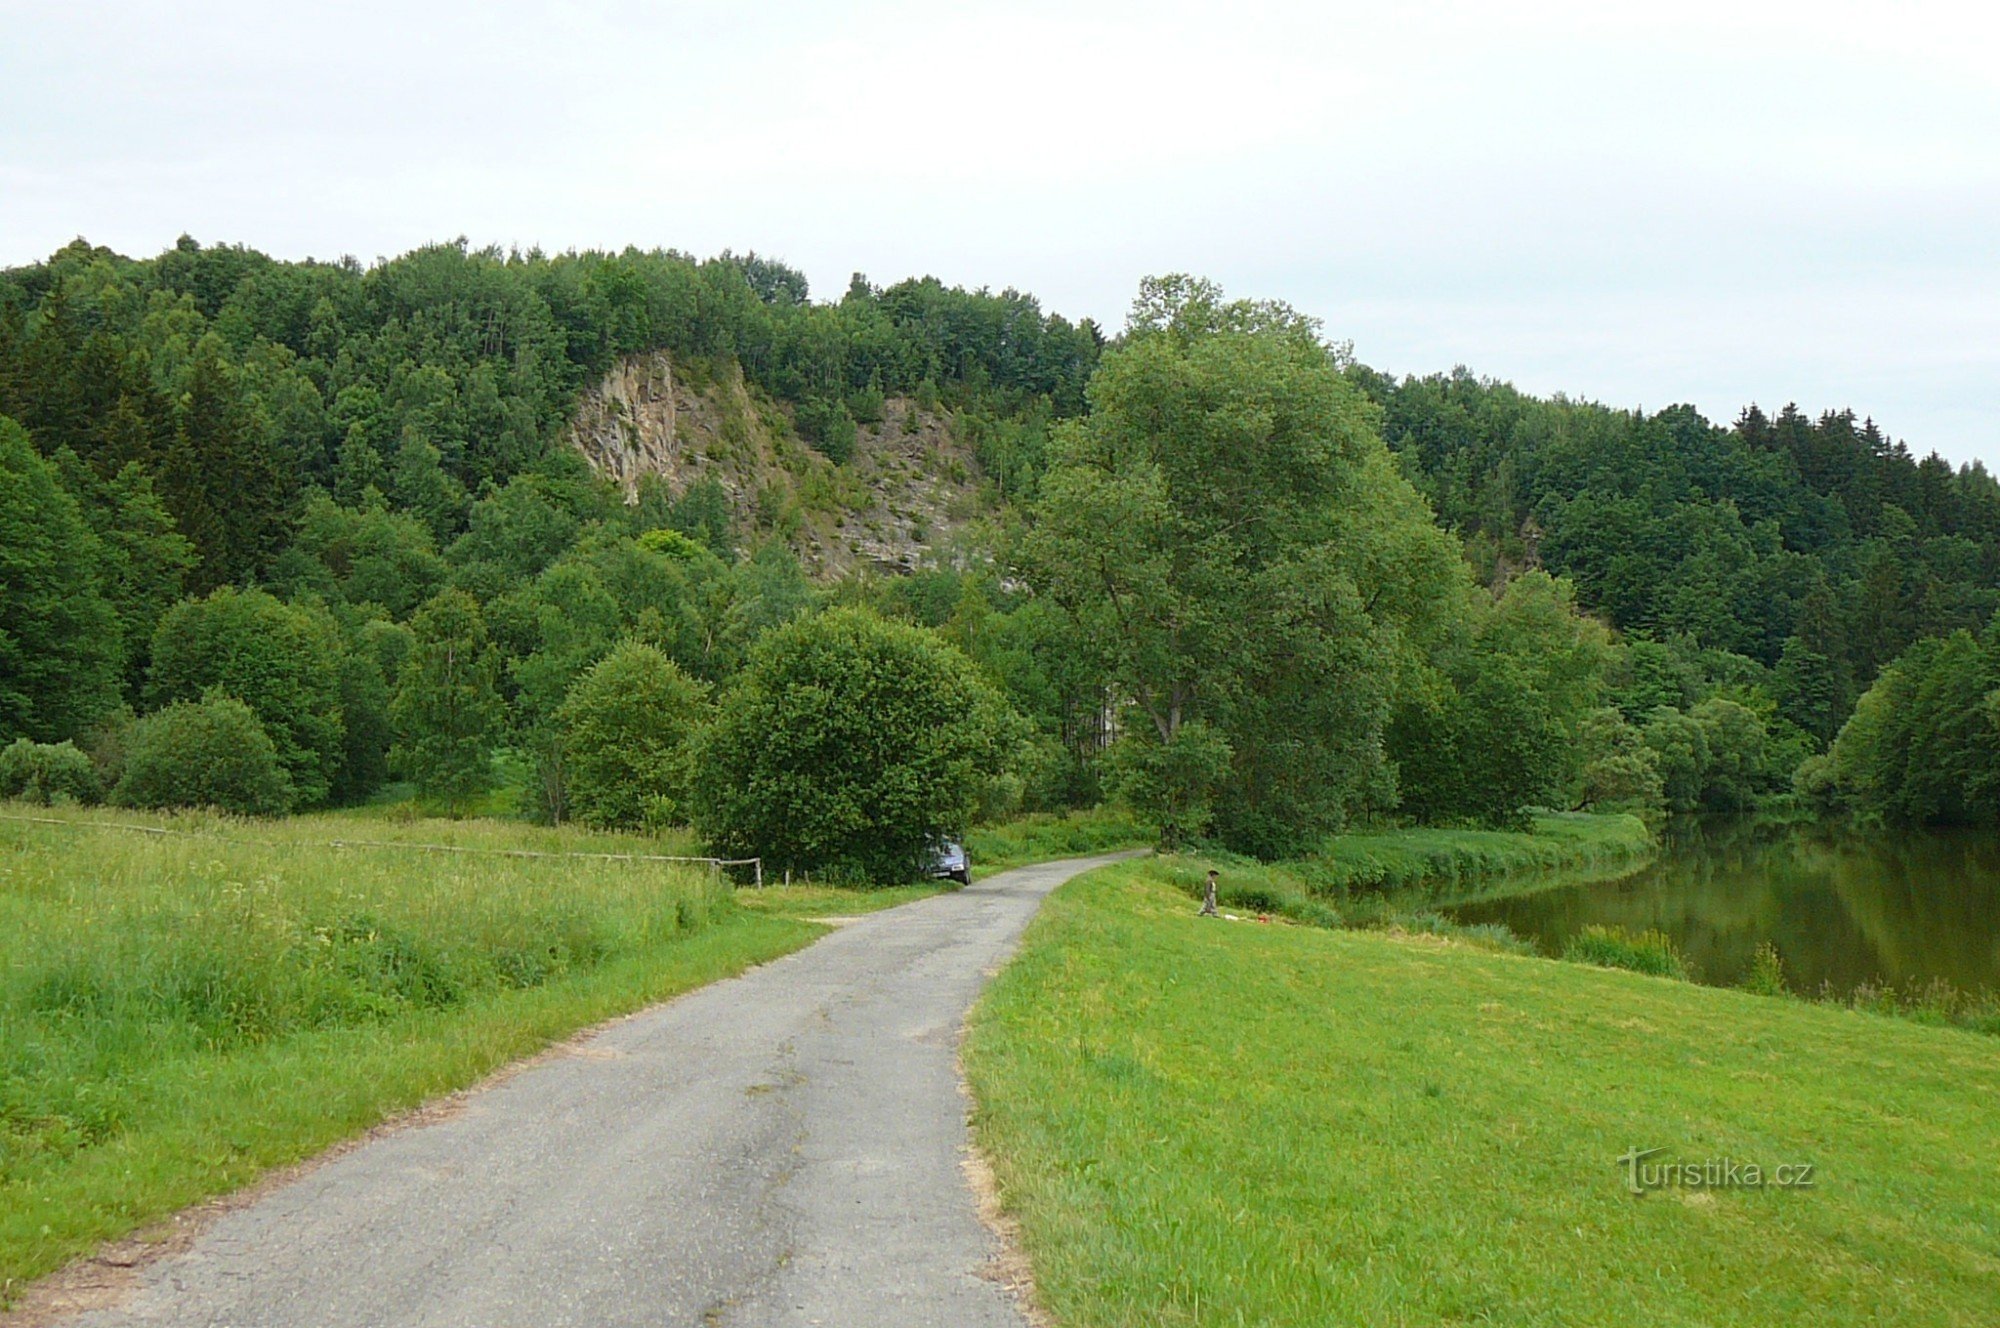 The intersection was named after the nearby quarry by the river Sázava